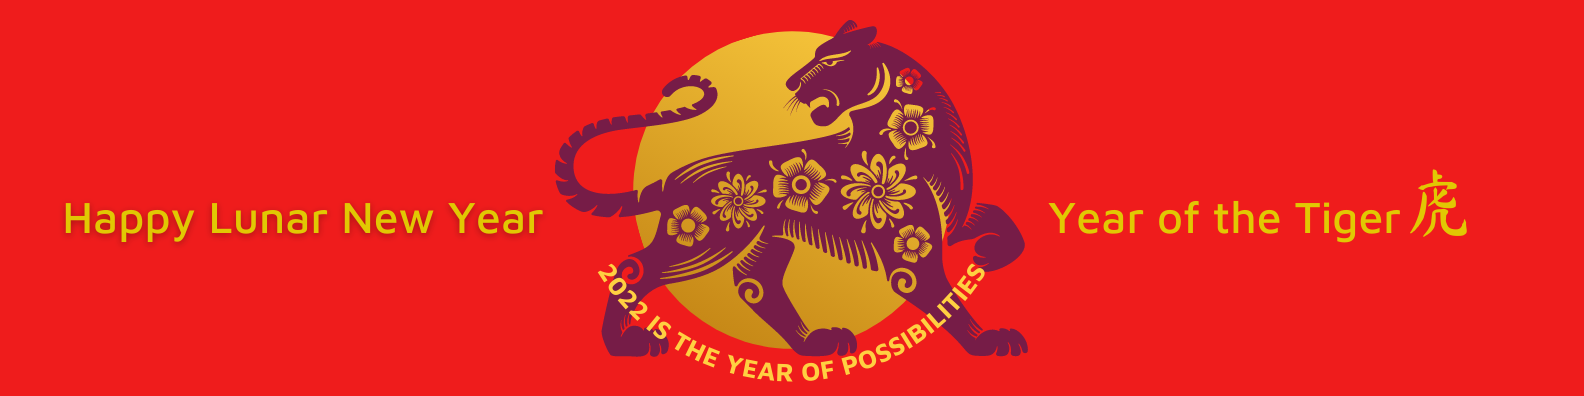 Vermilion Pinstripes Chinese New Year greetings 2022 is the year of the tiger - a year of possibilities